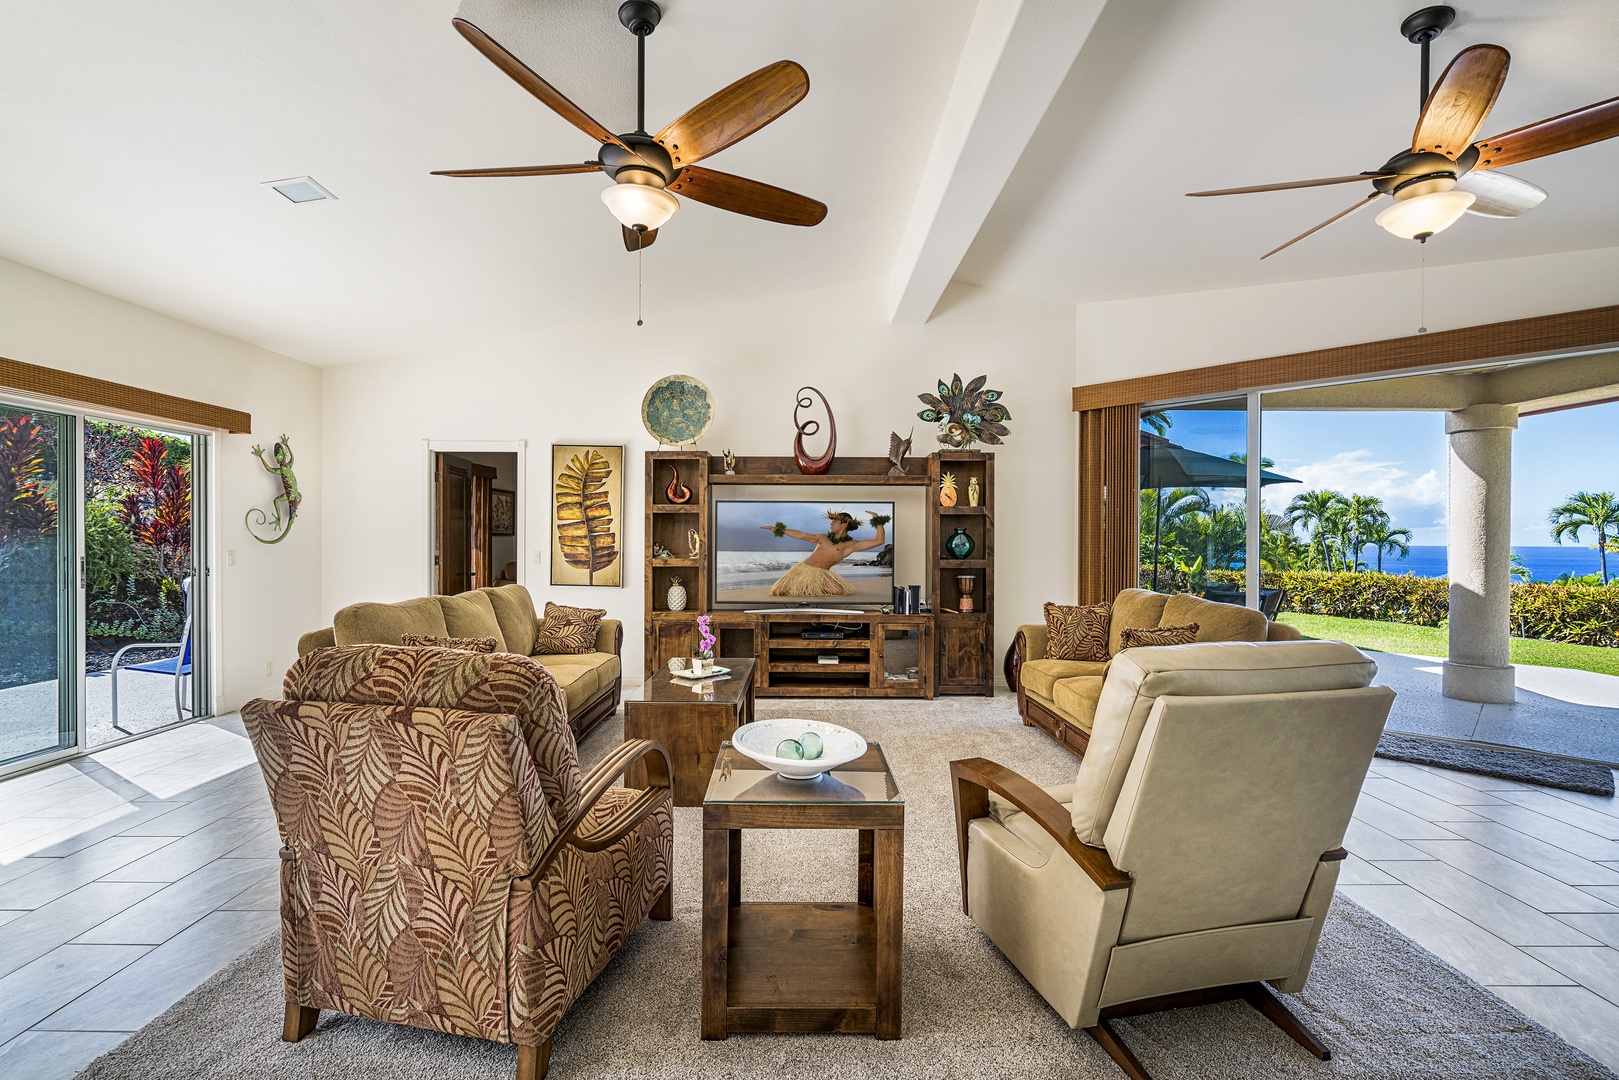 Kailua Kona Vacation Rentals, Maile Hale - All the creature comforts you'll need!